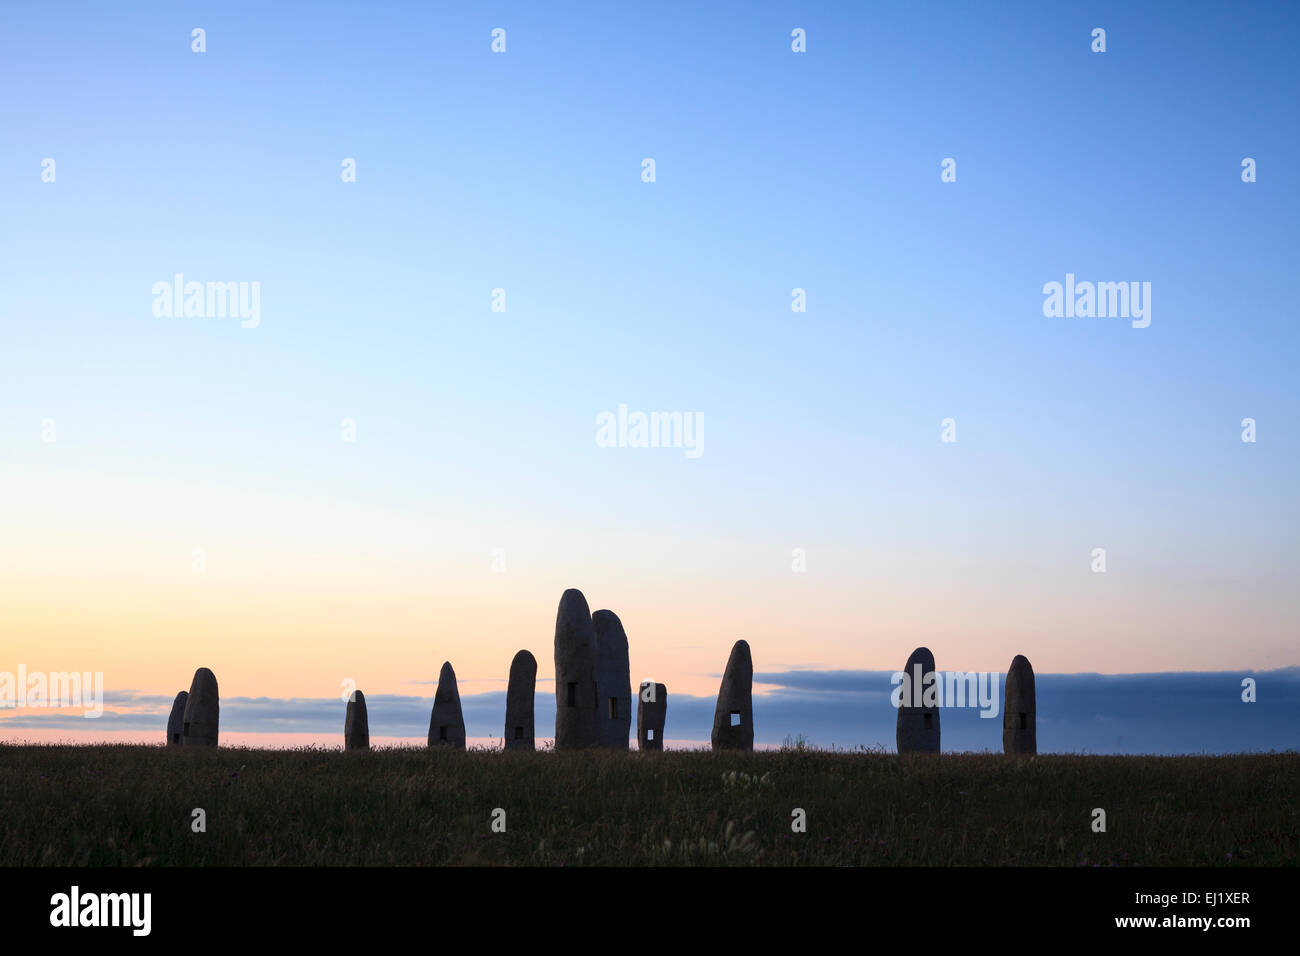 Menhir Monuments by Manolo Paz. A Coruña. Galicia. Spain. Stock Photo